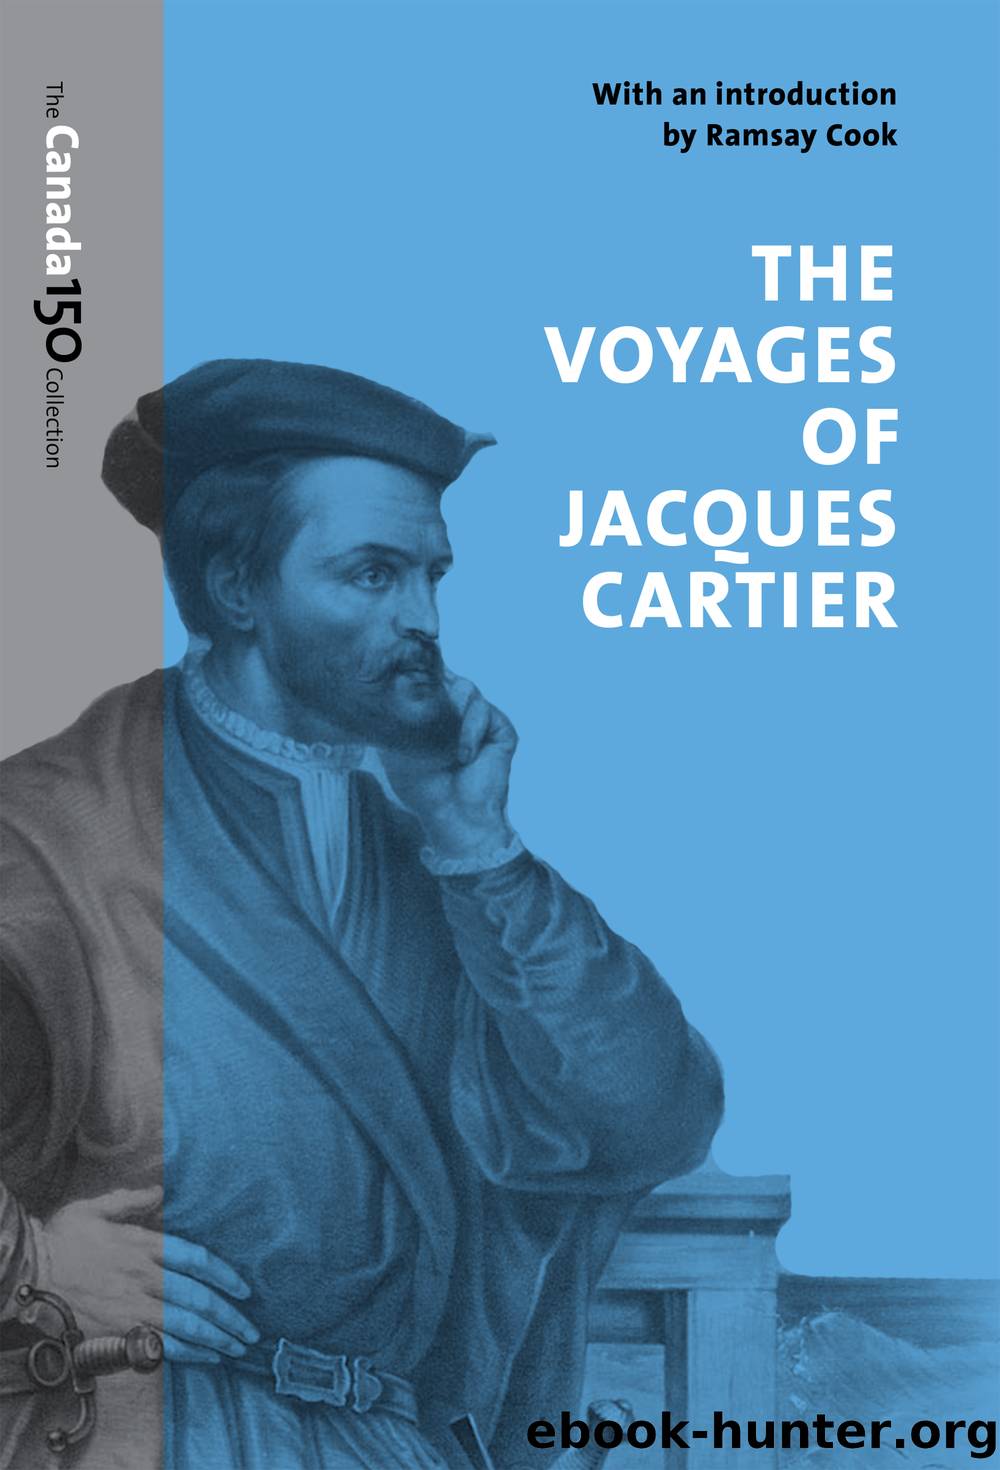 The Voyages of Jacques Cartier by Ramsay Cook